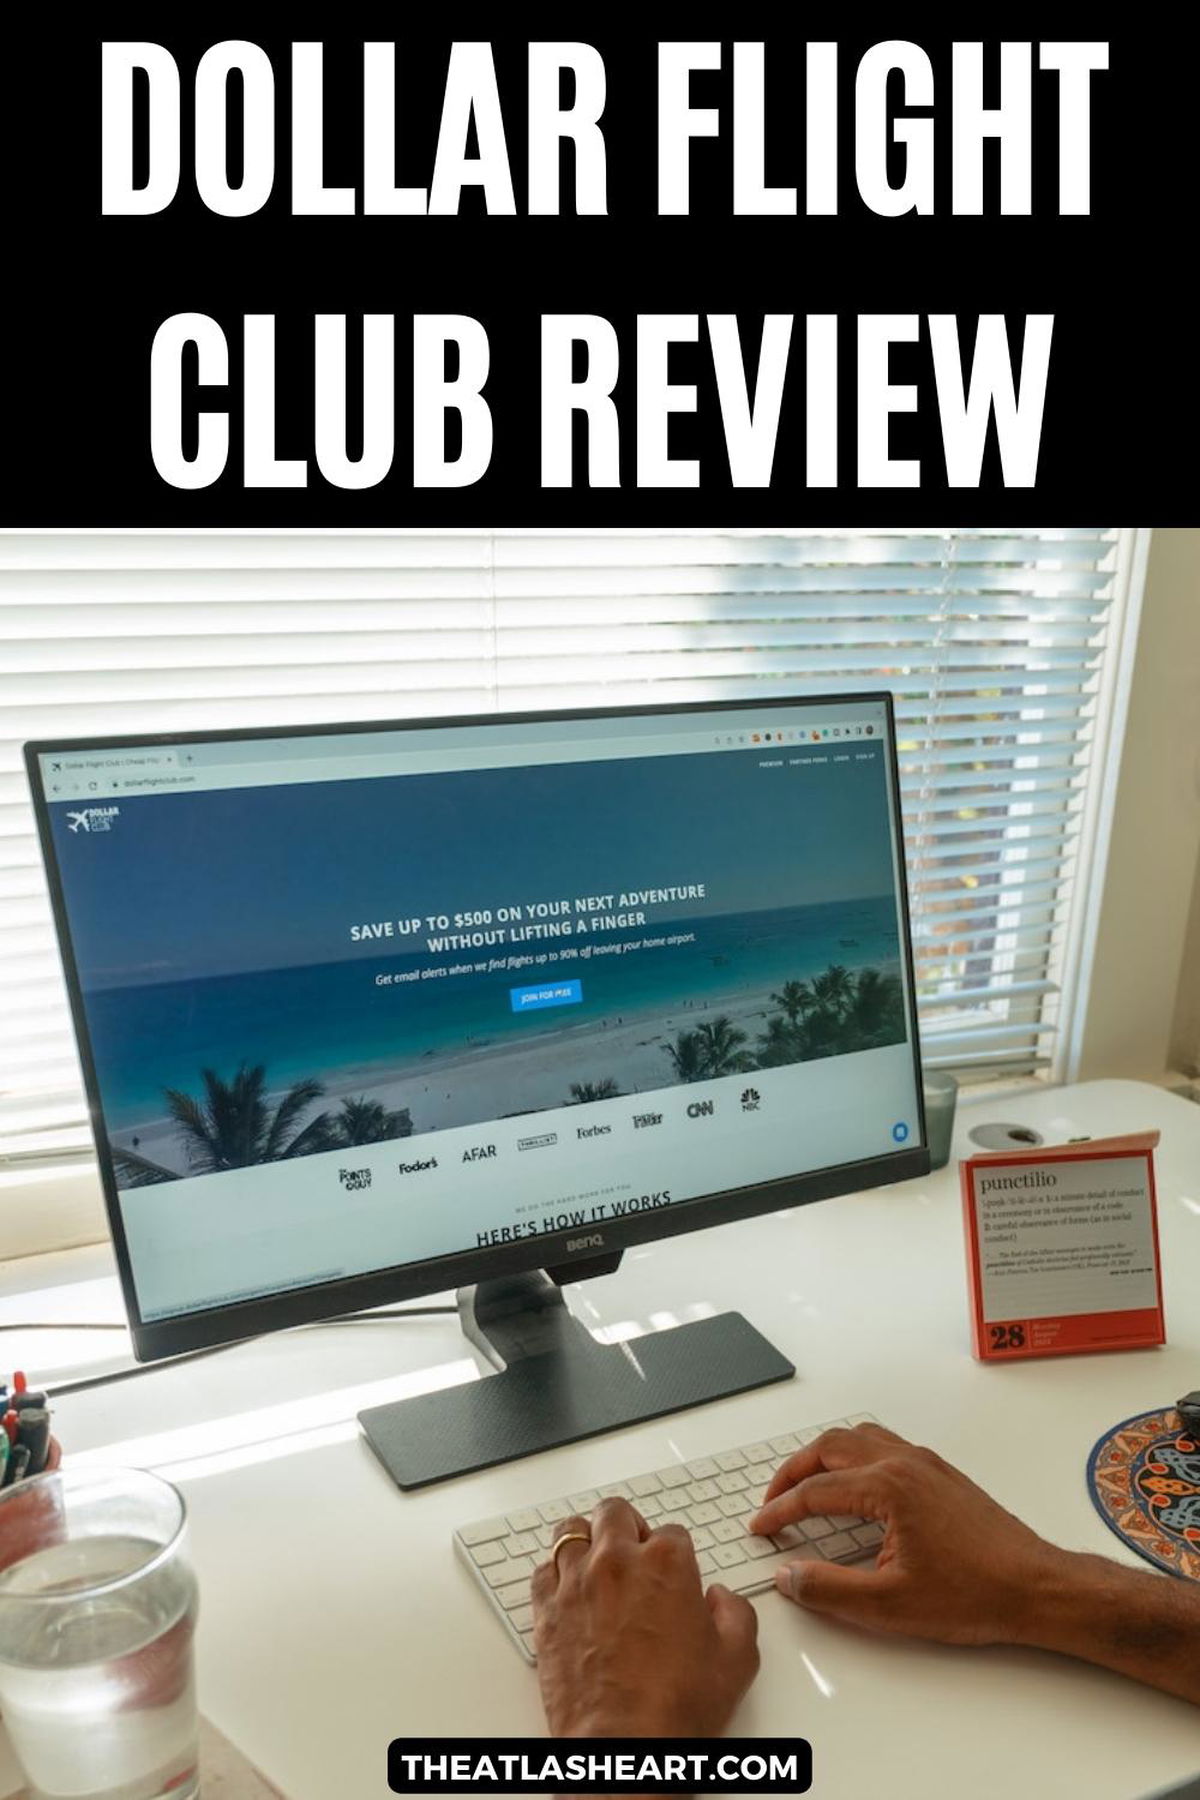 A pair of hands typing on a keyboard on a computer desk in front of a desktop monitor displaying the Dollar Flight Club website homepage, with the text overlay, "Dollar Flight Club Review."